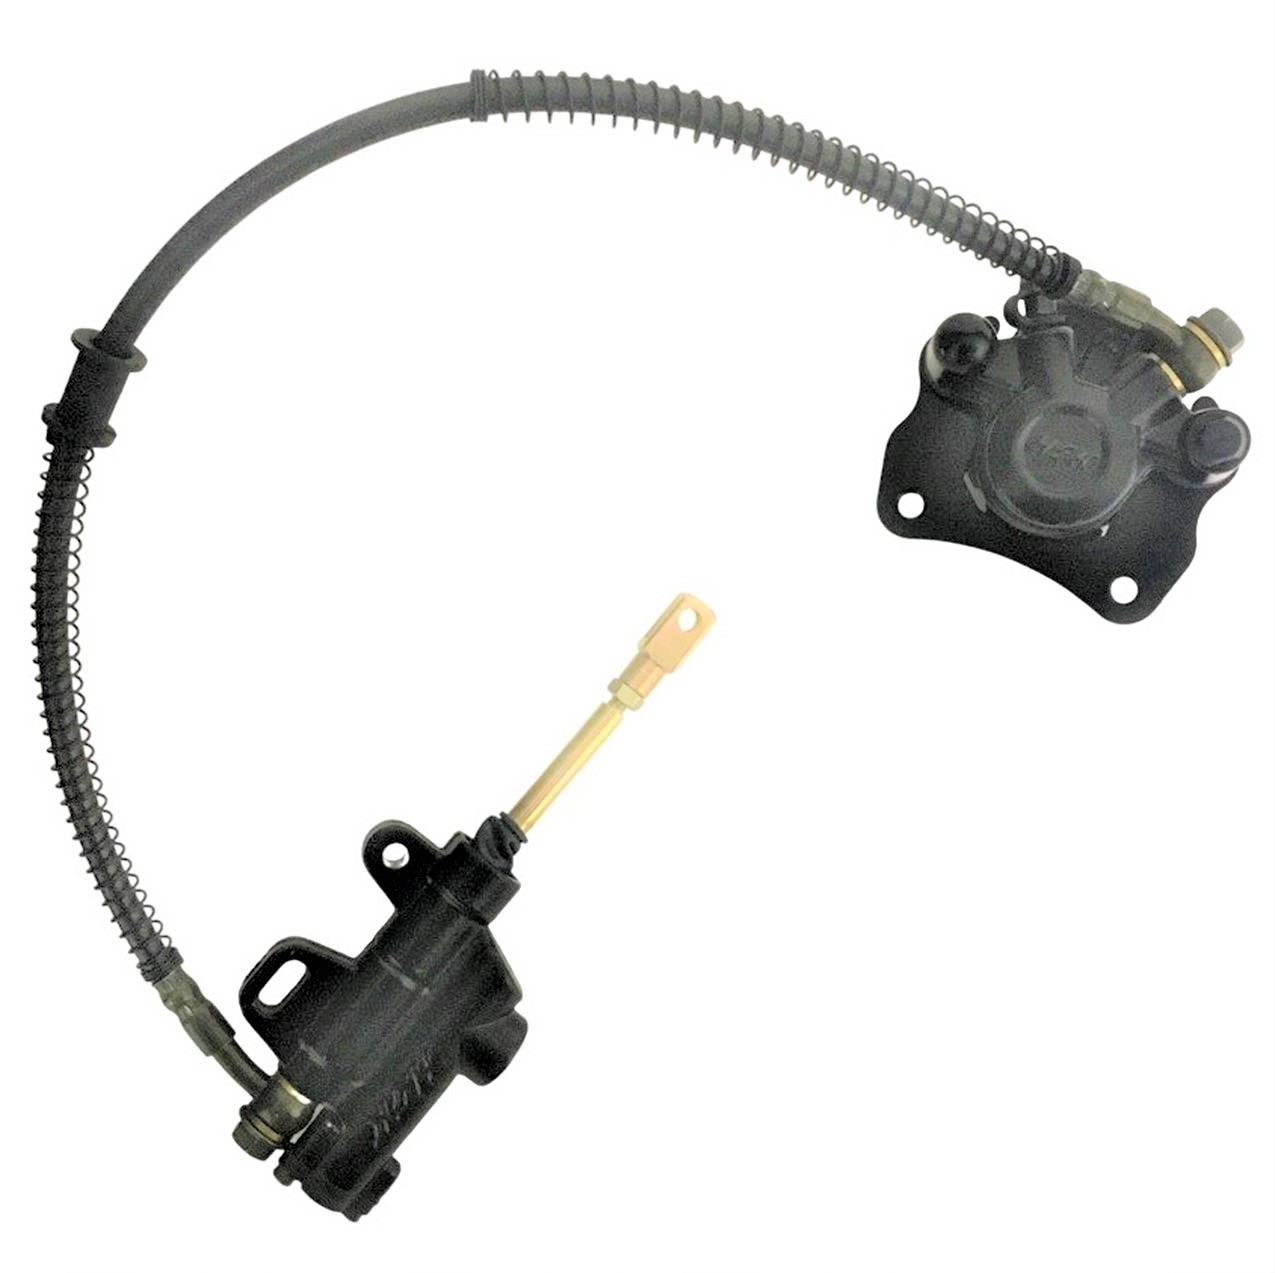 REAR FOOT BRAKE ASSEMBLY Crt Bolt to End of Arm L=84mm Line L=22" Caliper Bolts c/c=62mm Master Cylinder bolts c/c 40-50mm Rod Length from Base to Center of Connector Pin = 90mm - Click Image to Close